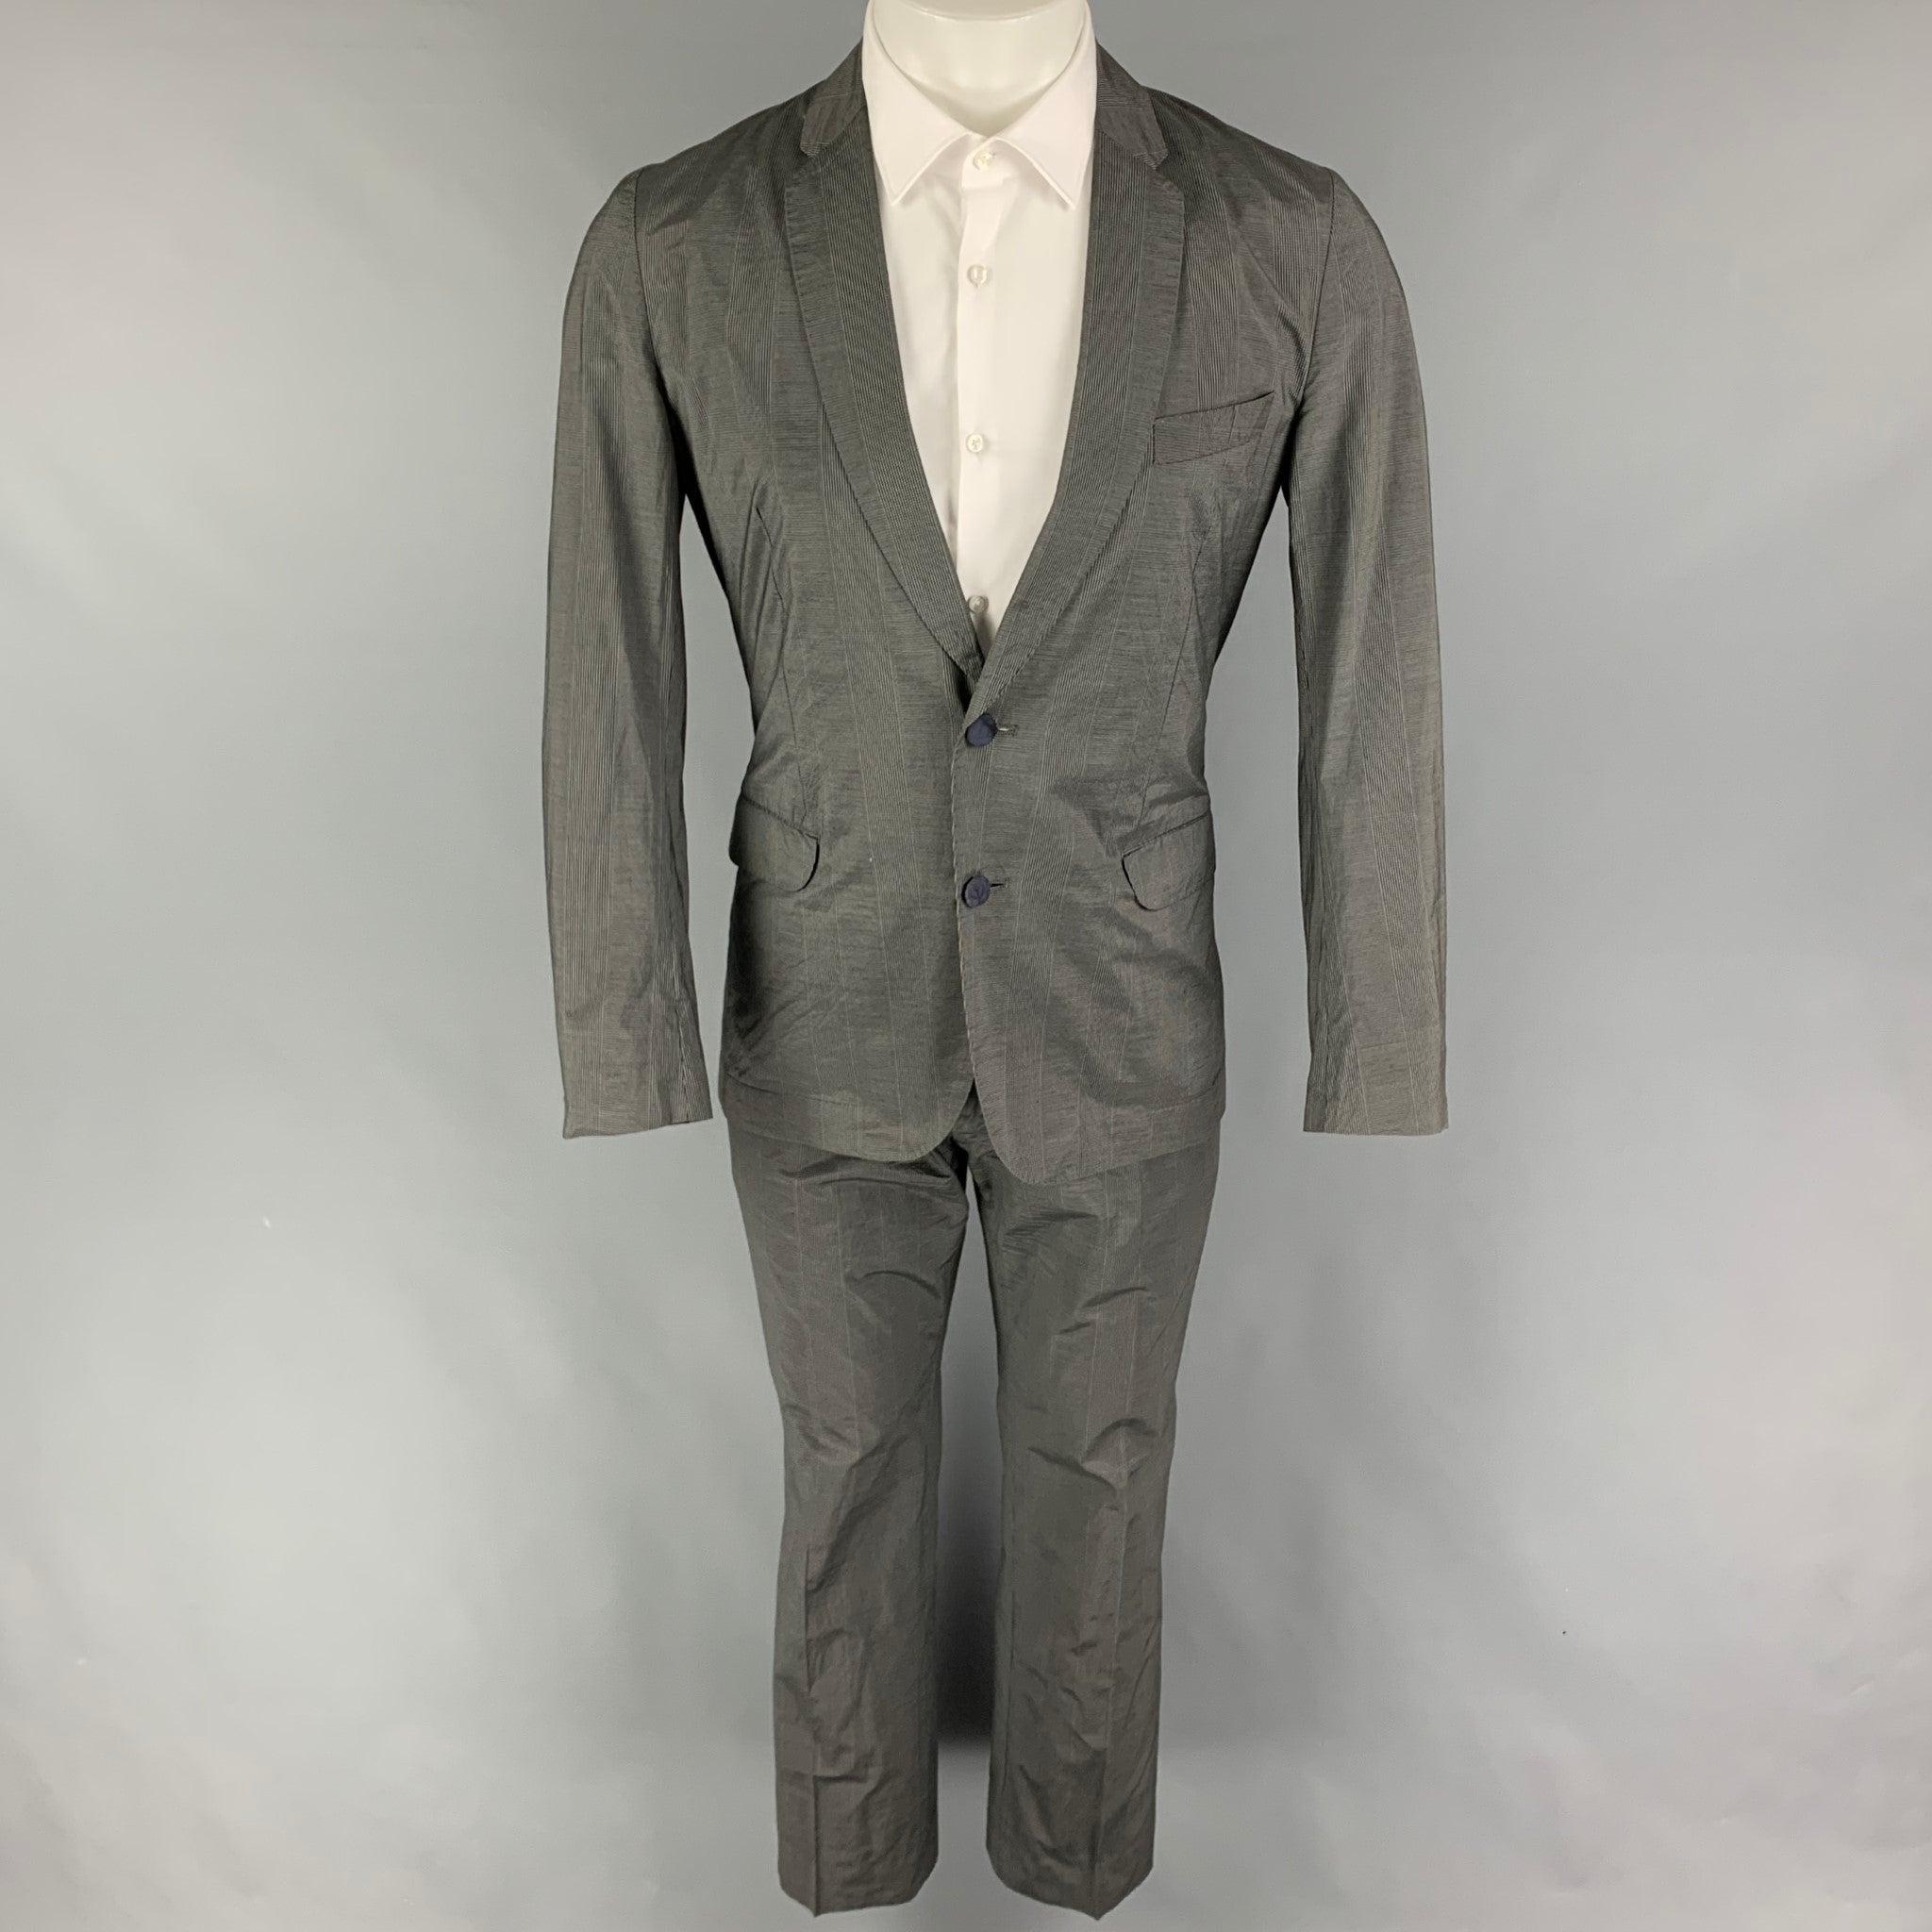 PAUL SMITH
suit comes in a gray glenplaid cotton / silk and includes a single breasted, double button sport coat with a notch lapel and matching flat front trousers. Good Pre-Owned Condition.
Light marks at front. Missing pants button closure. 